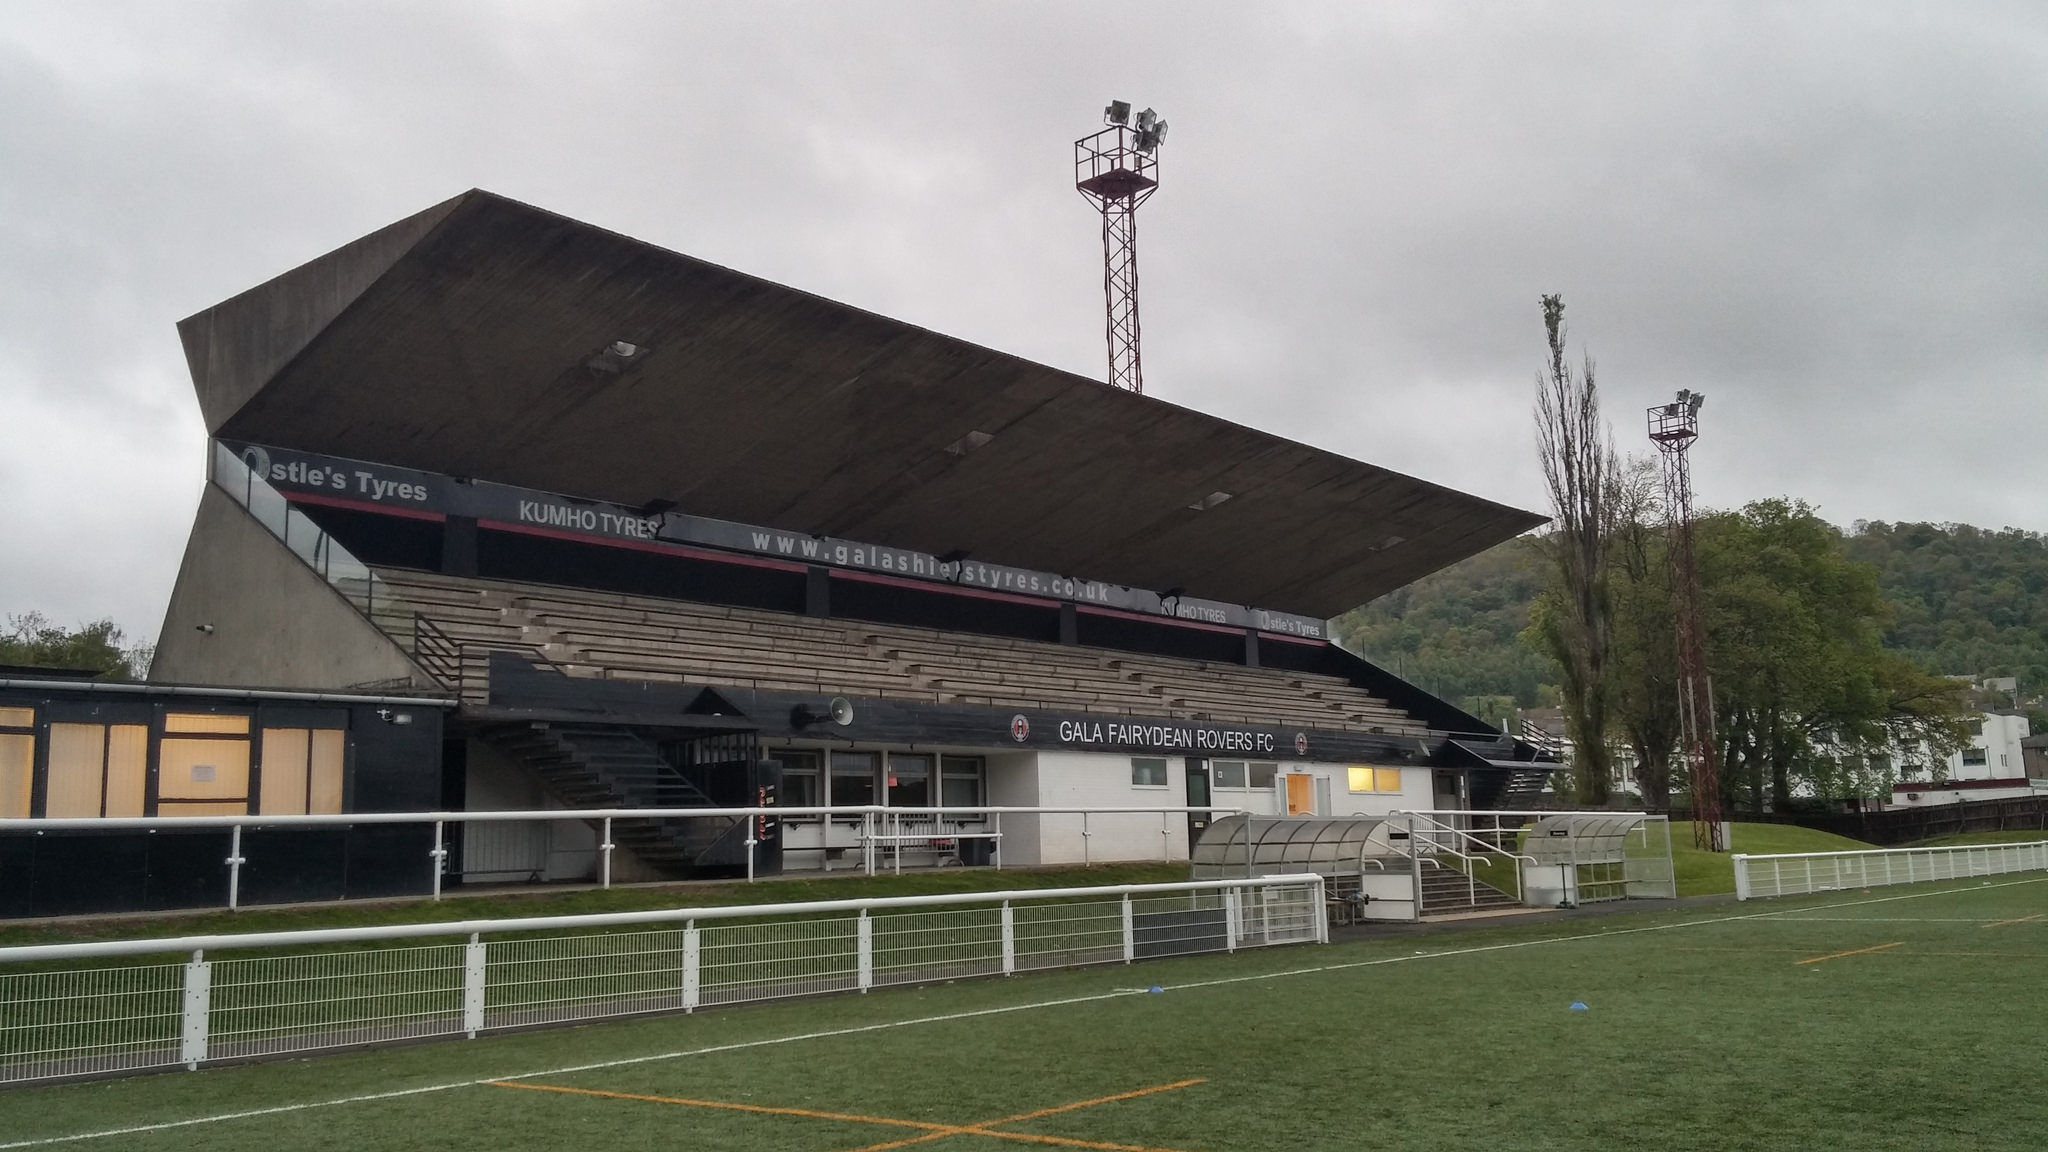 Investigation underway to preserve architecturally historic football stand